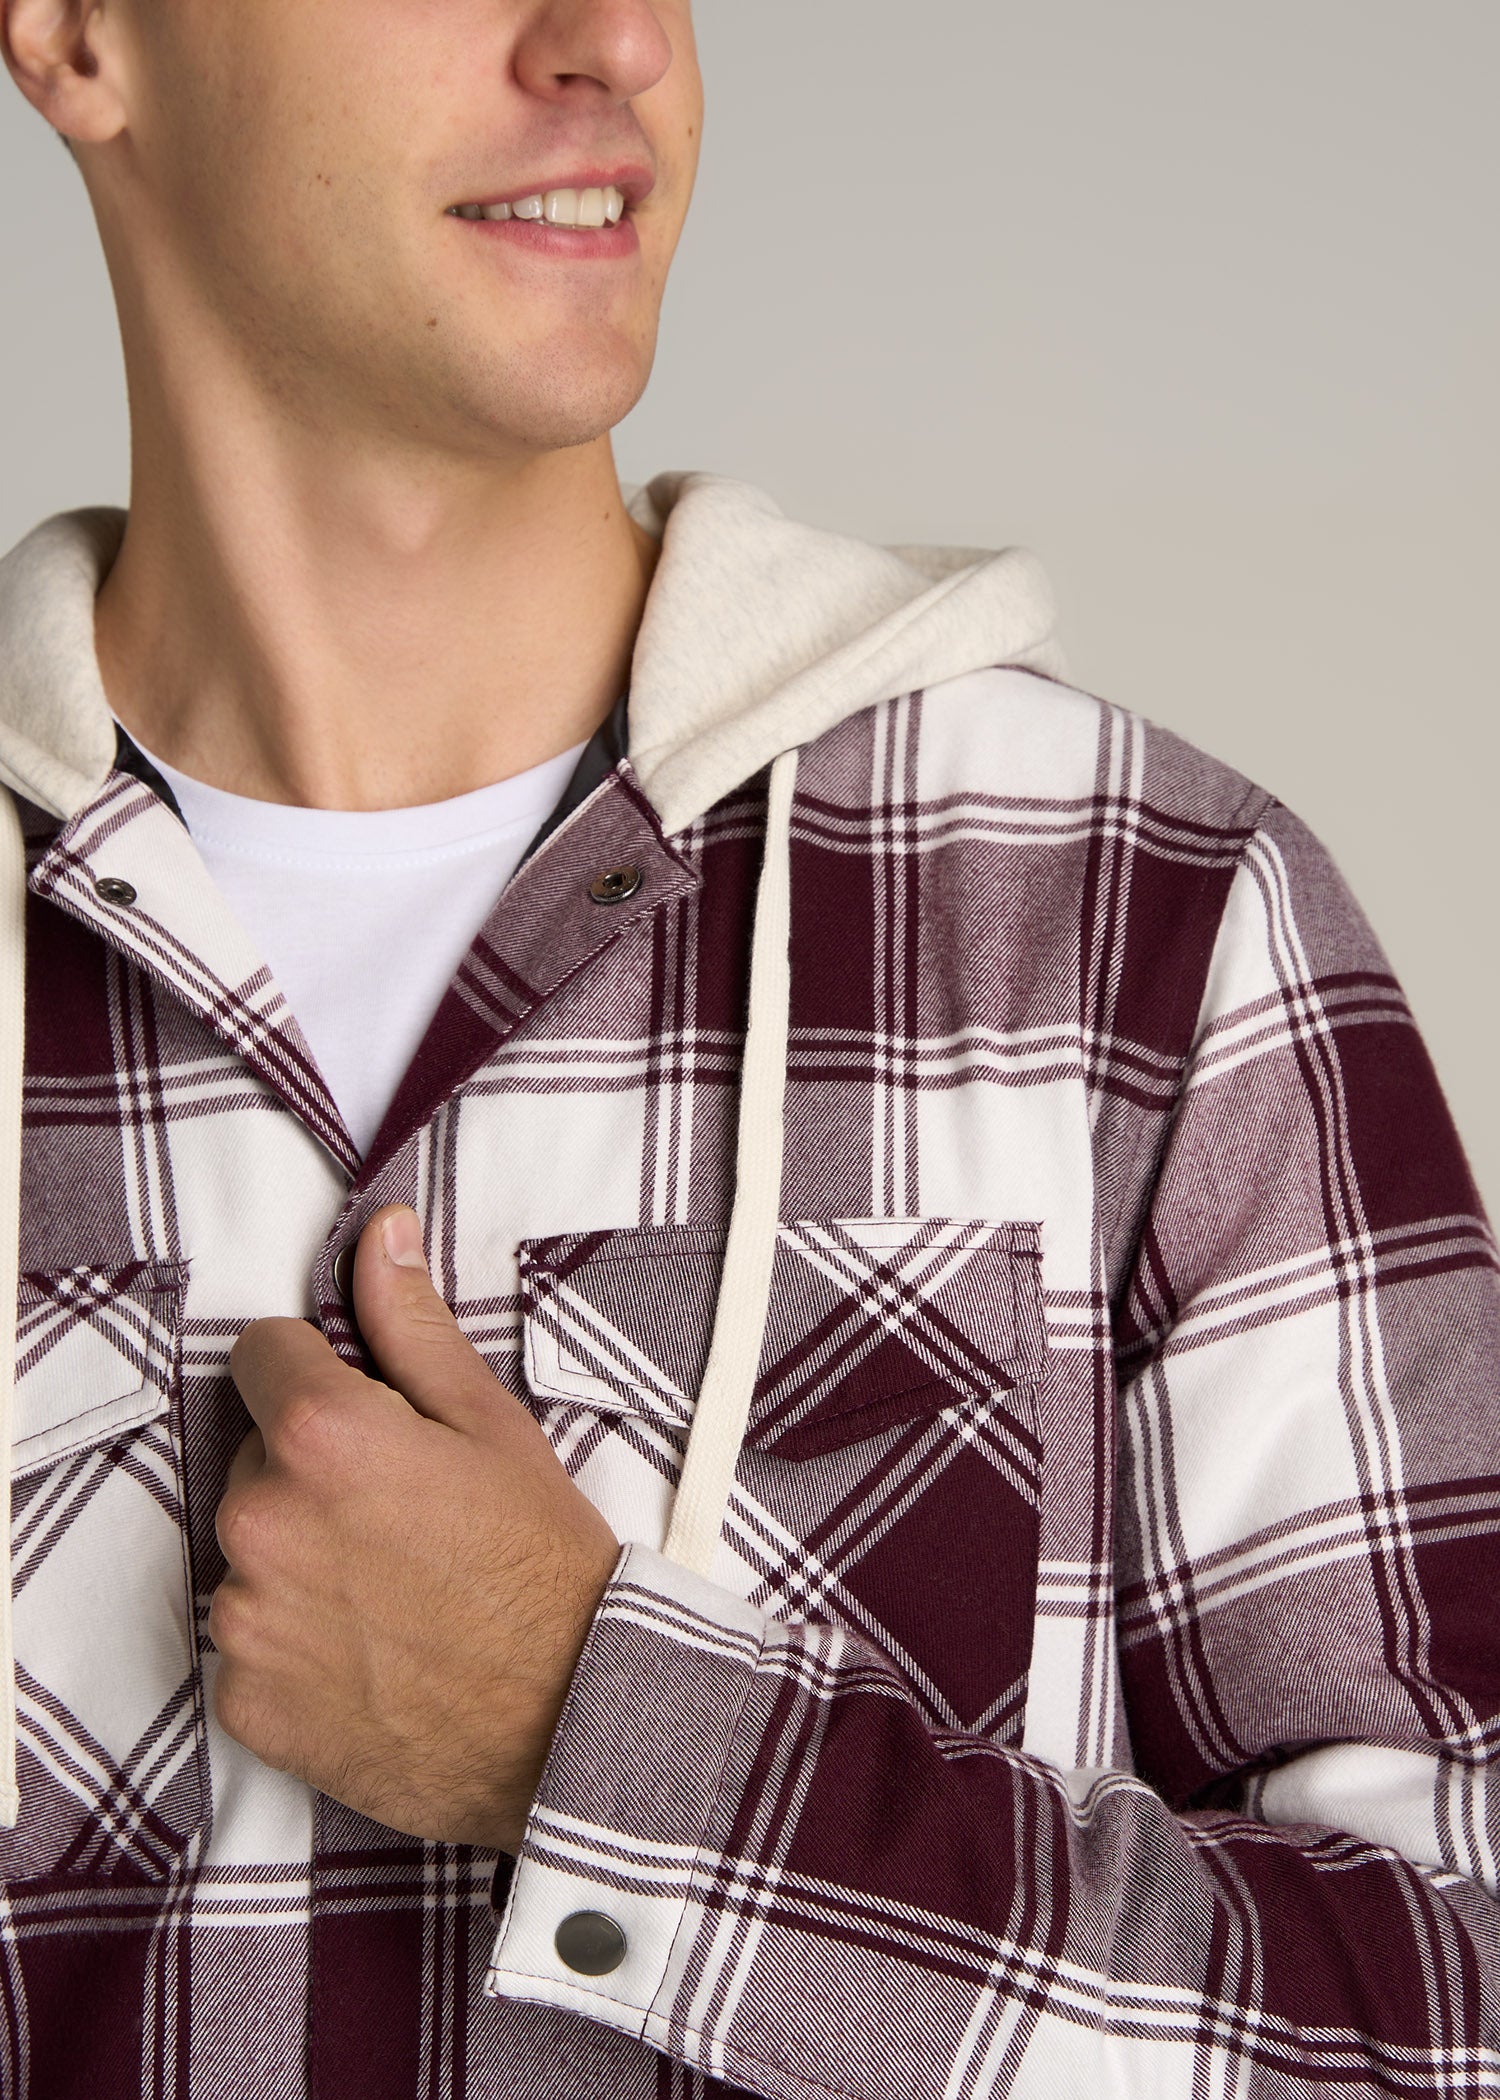 Hooded Flannel Shirt Jacket for Tall Men in Maroon & White Plaid 2XL / Extra Tall / Maroon & White Plaid